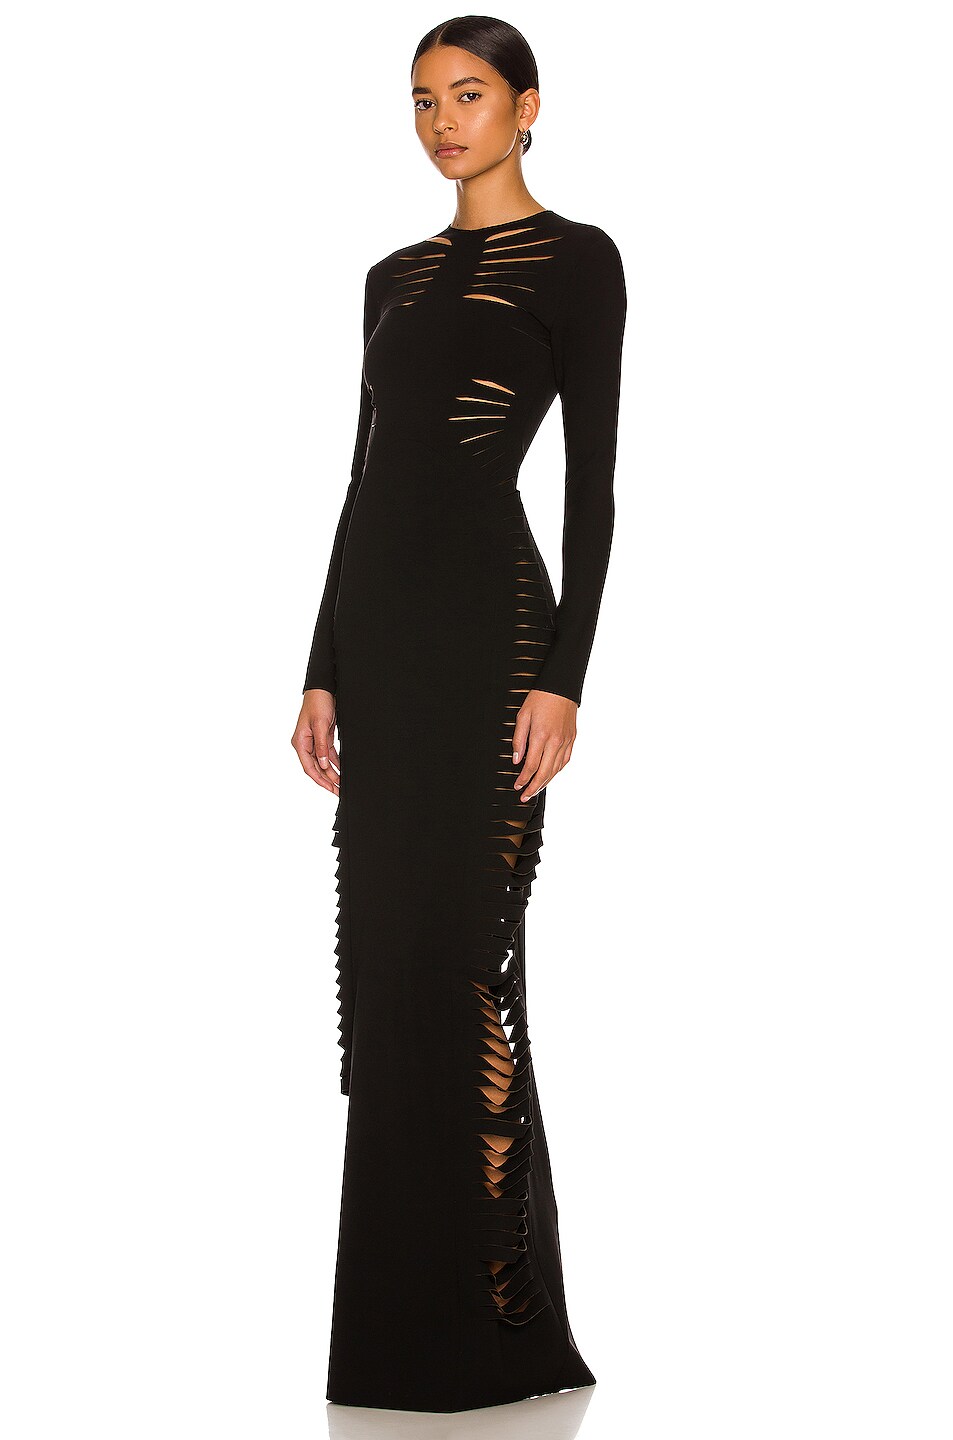 TOM FORD Cut Out Gown in Black | FWRD